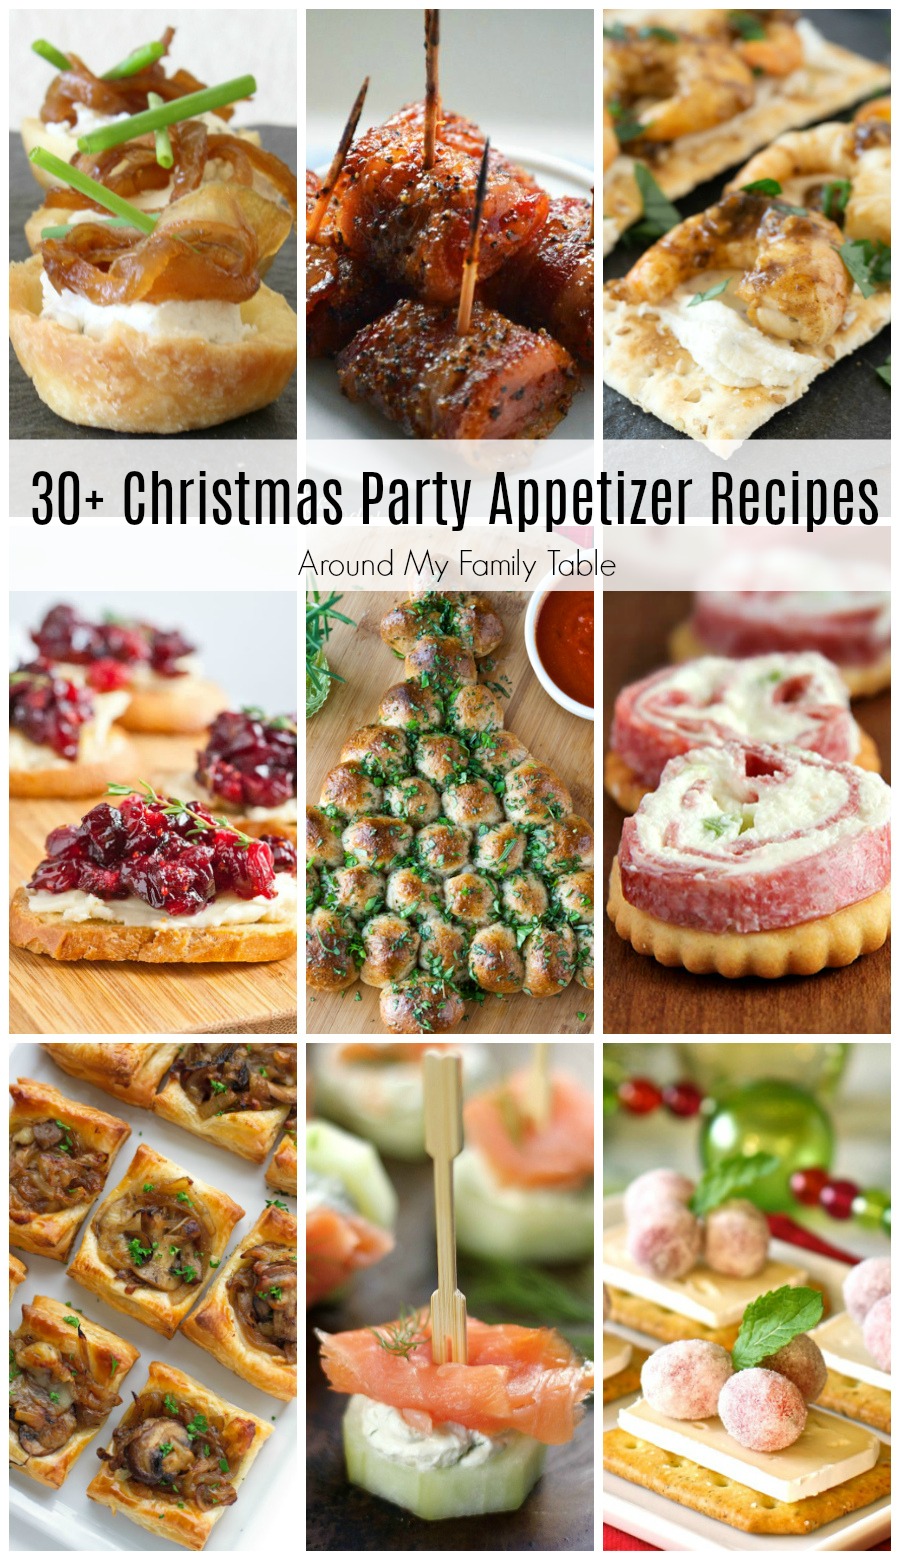 These Christmas party appetizer recipes are perfect to serve at your holiday party! The recipes are easy to prepare so you can enjoy more time with your guests. From Christmas party finger foods to Christmas themed appetizer ideas these are the best holiday party recipes.